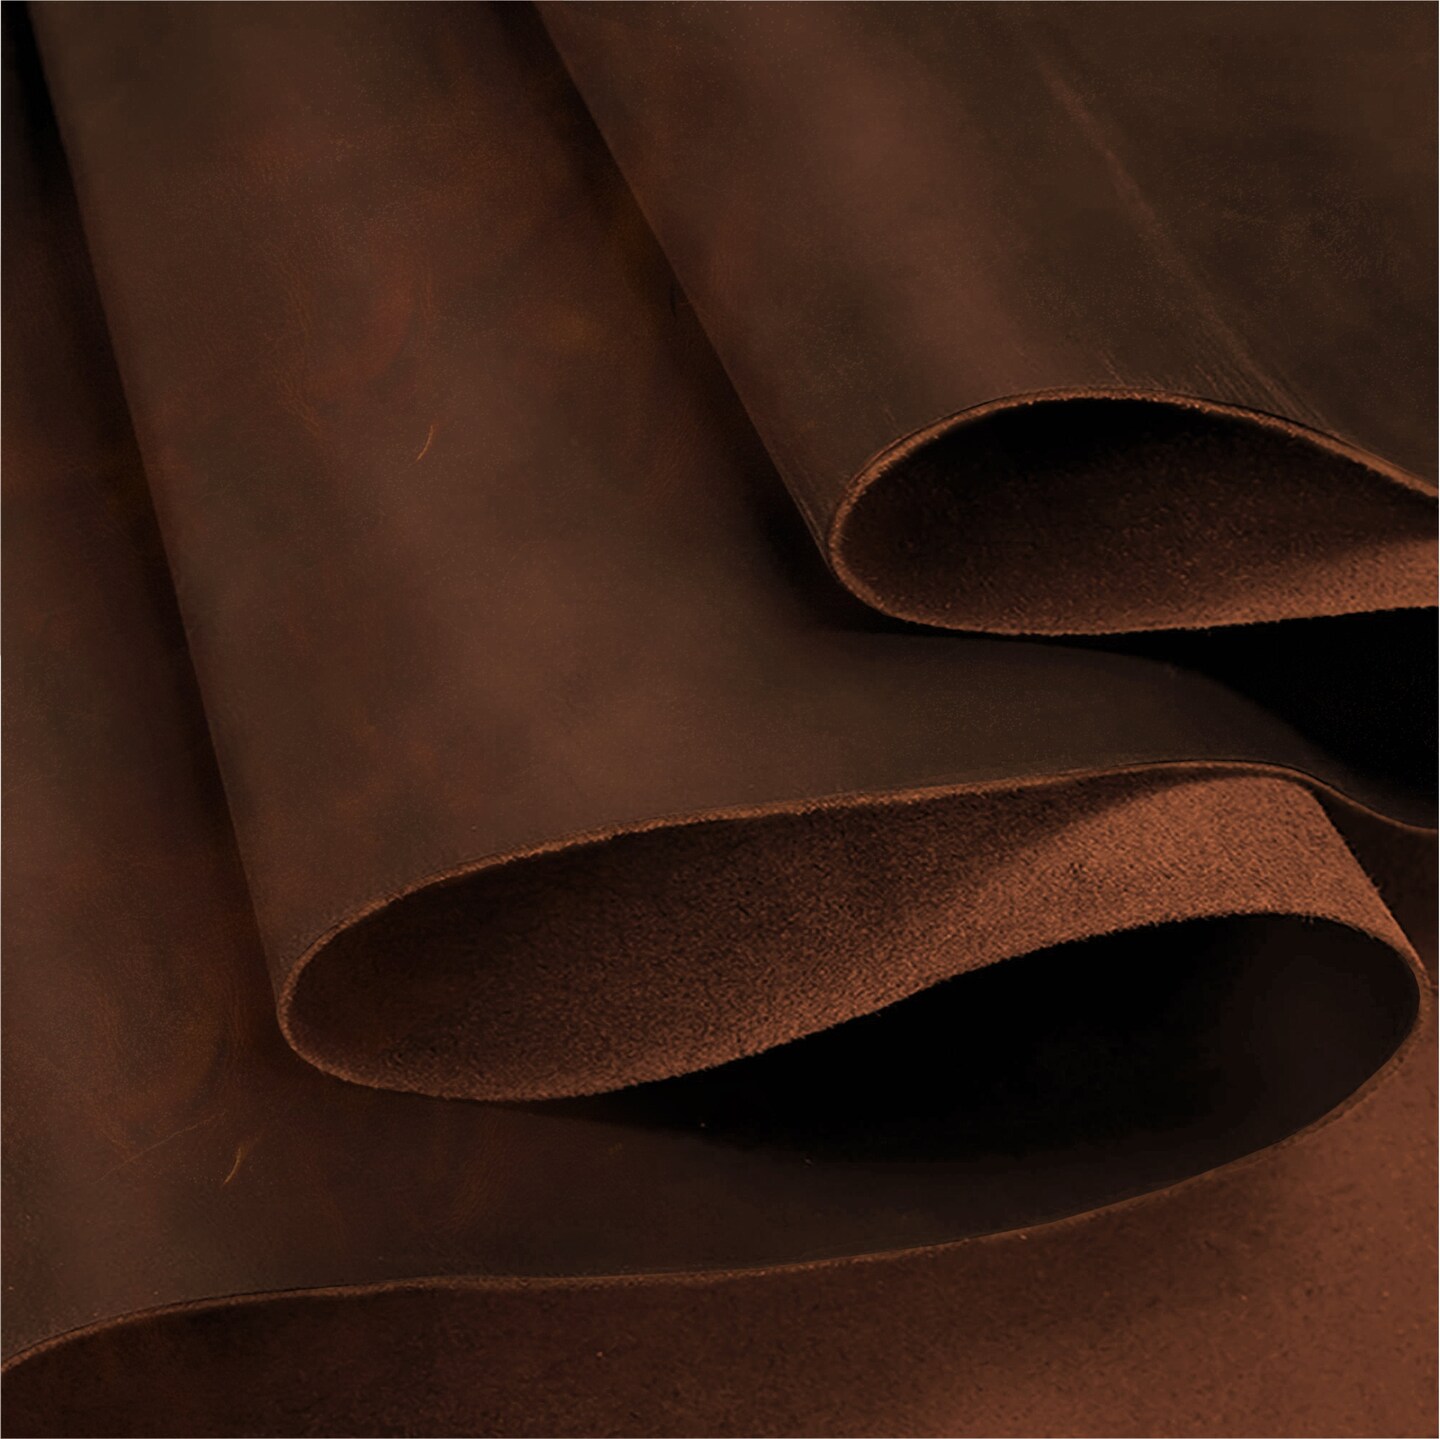 European Leather Work 9-10 oz. (3.6-4mm) Oil-Tanned Leather Scraps Bourbon  Brown Cowhide Full Grain Leather for Tooling, Accessories, Jewelry,  Crafting, and DIY Projects